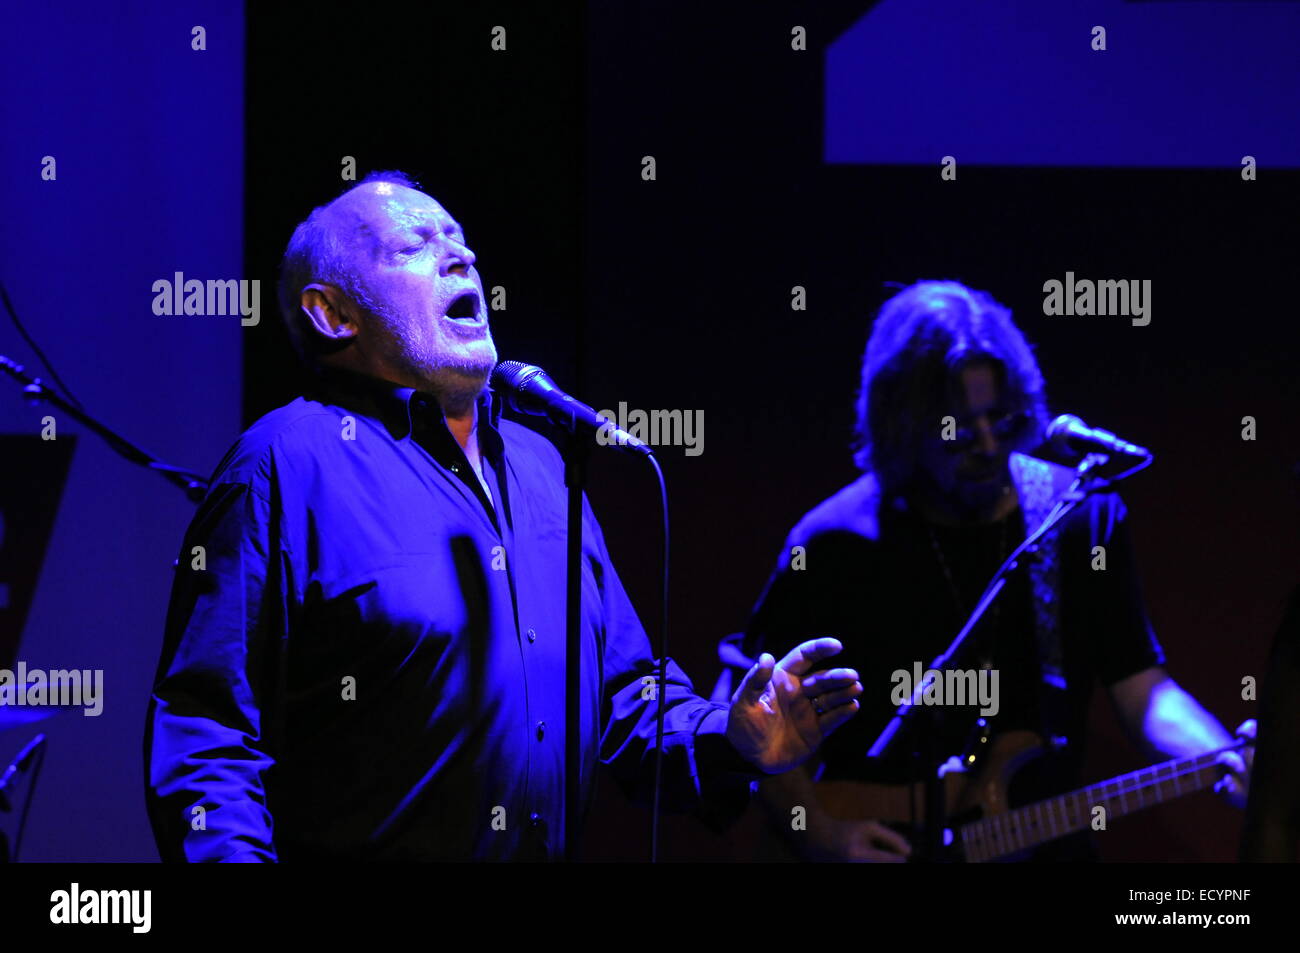 Cologne, Germany. 18th Nov, 2012. British singer Joe Cocker performs during a concert for the German public broadcaster WDR2 in Cologne, Germany, 18 November 2012. Photo: Horst Galuschka/dpa/Alamy Live News Stock Photo